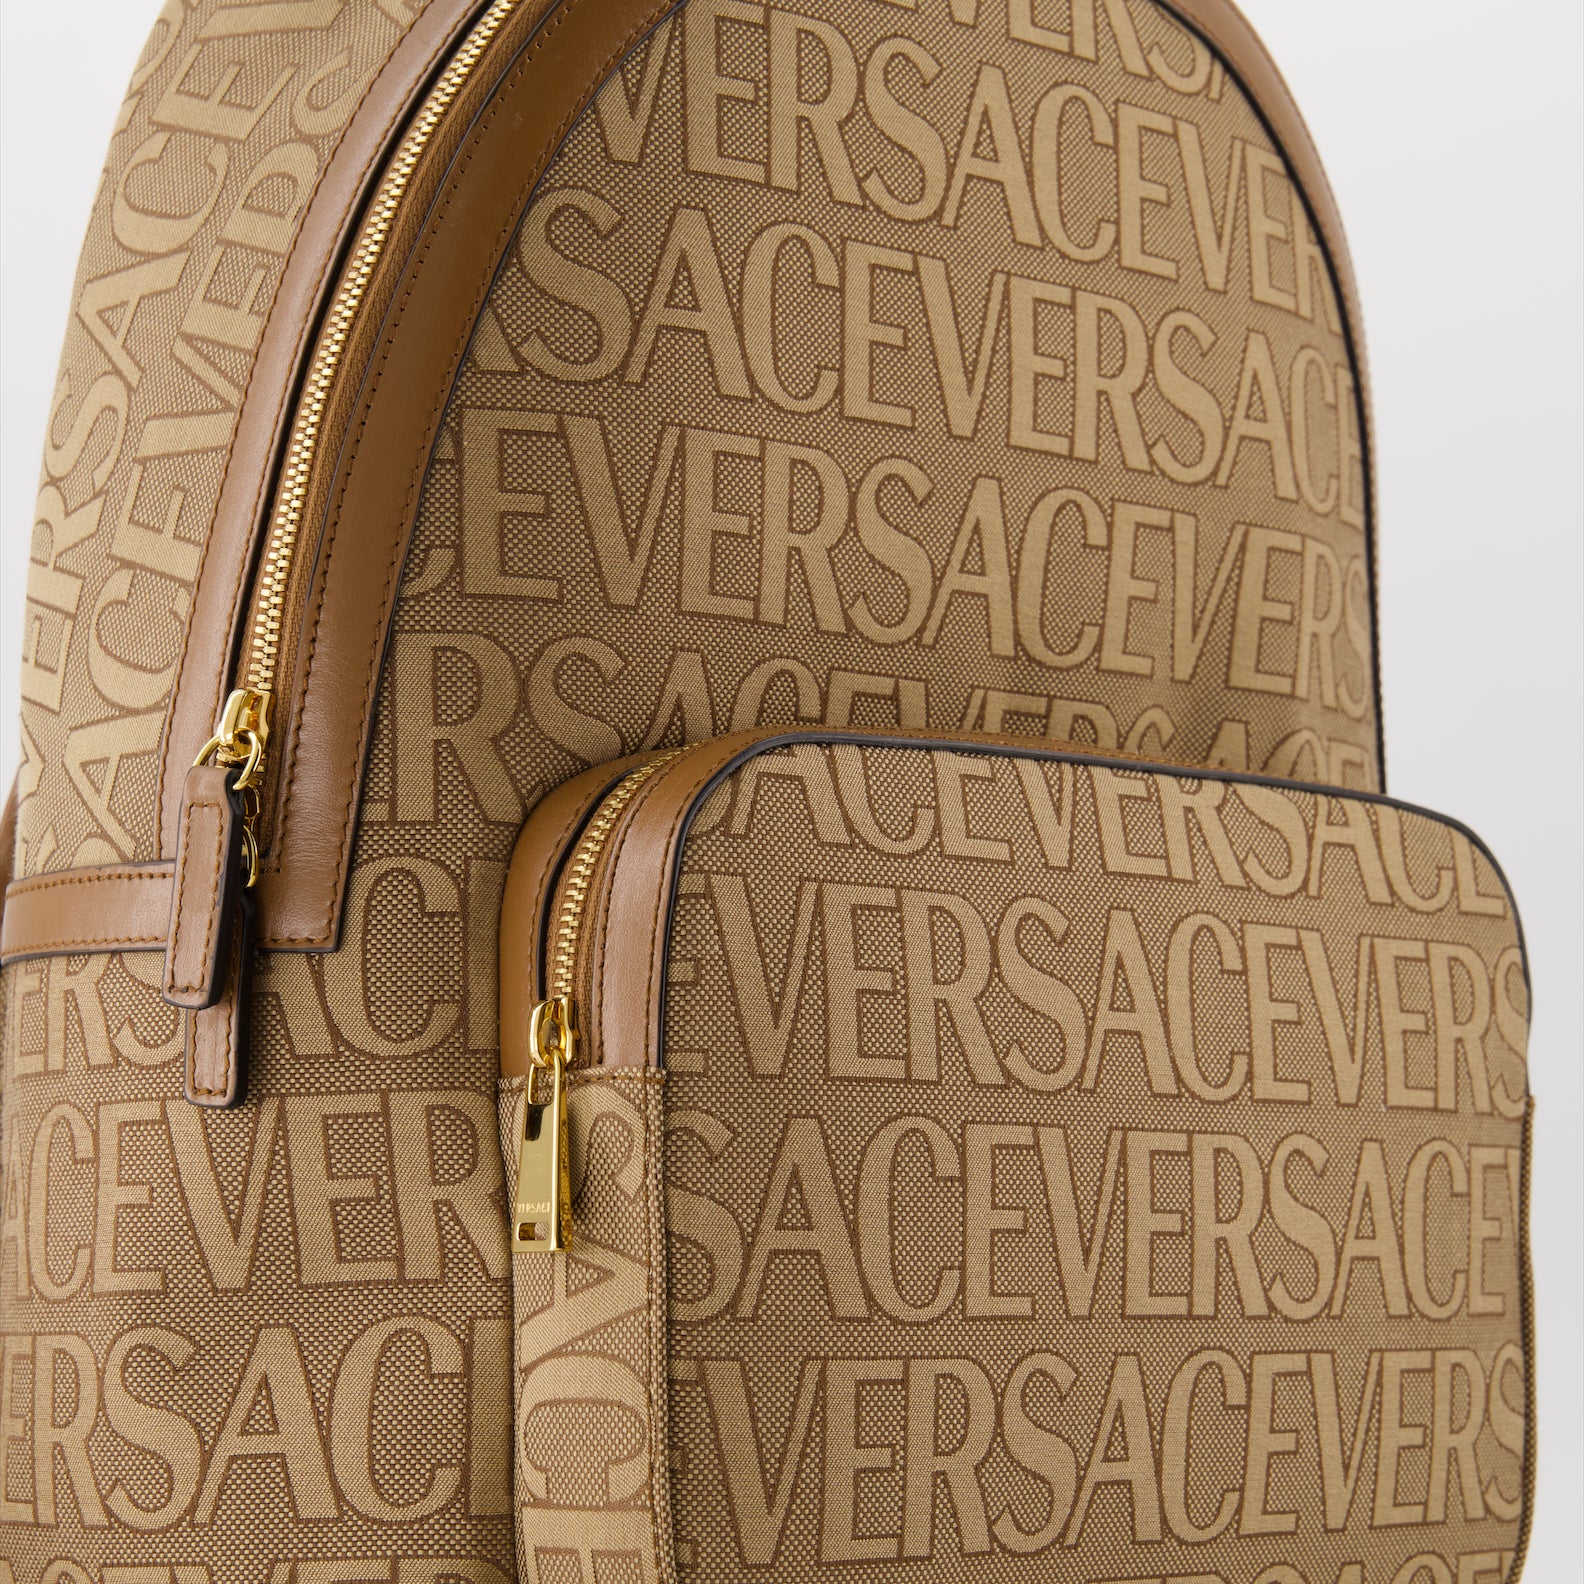 Versace Allover Backpack